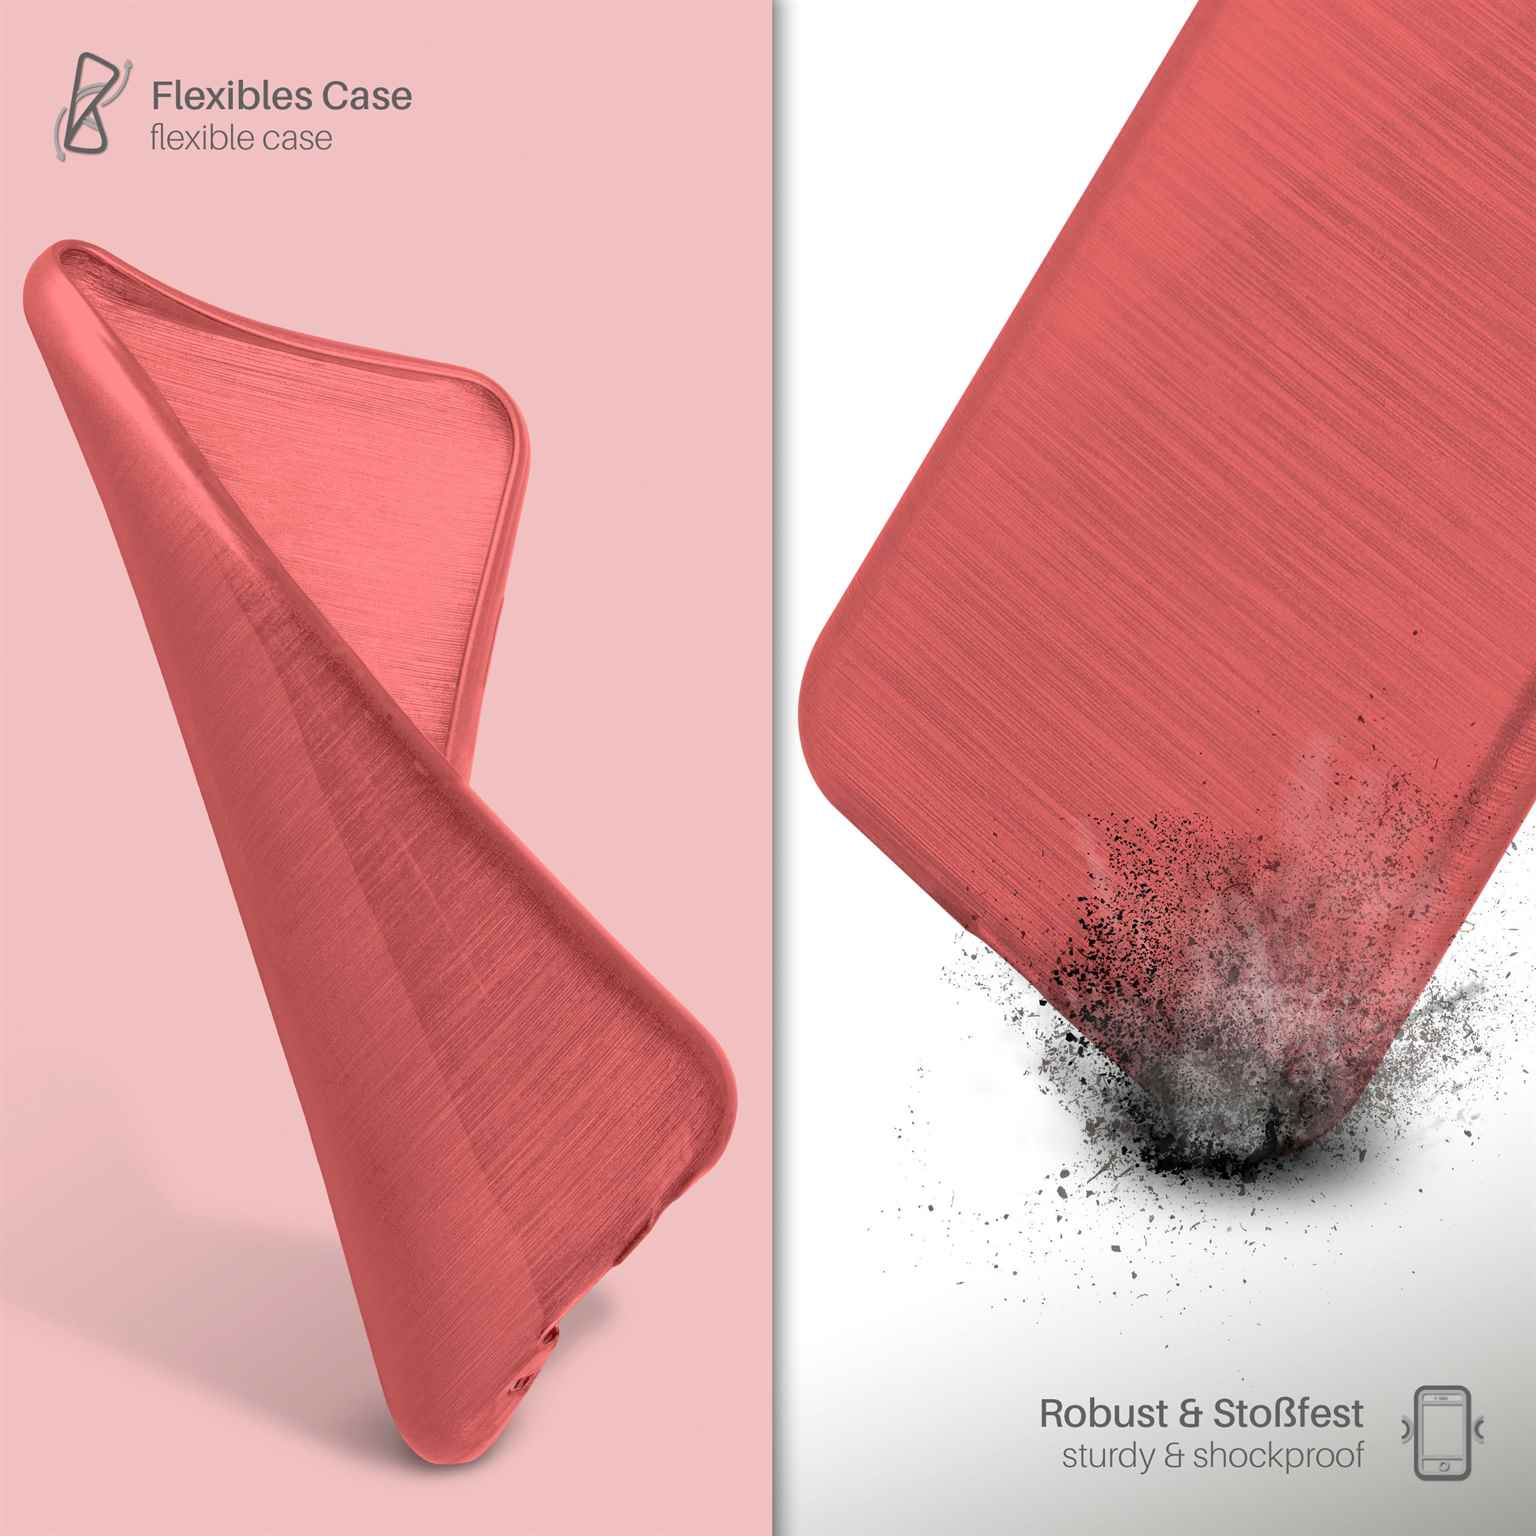 MOEX Brushed Case, iPhone Coral-Red Backcover, Apple, 7